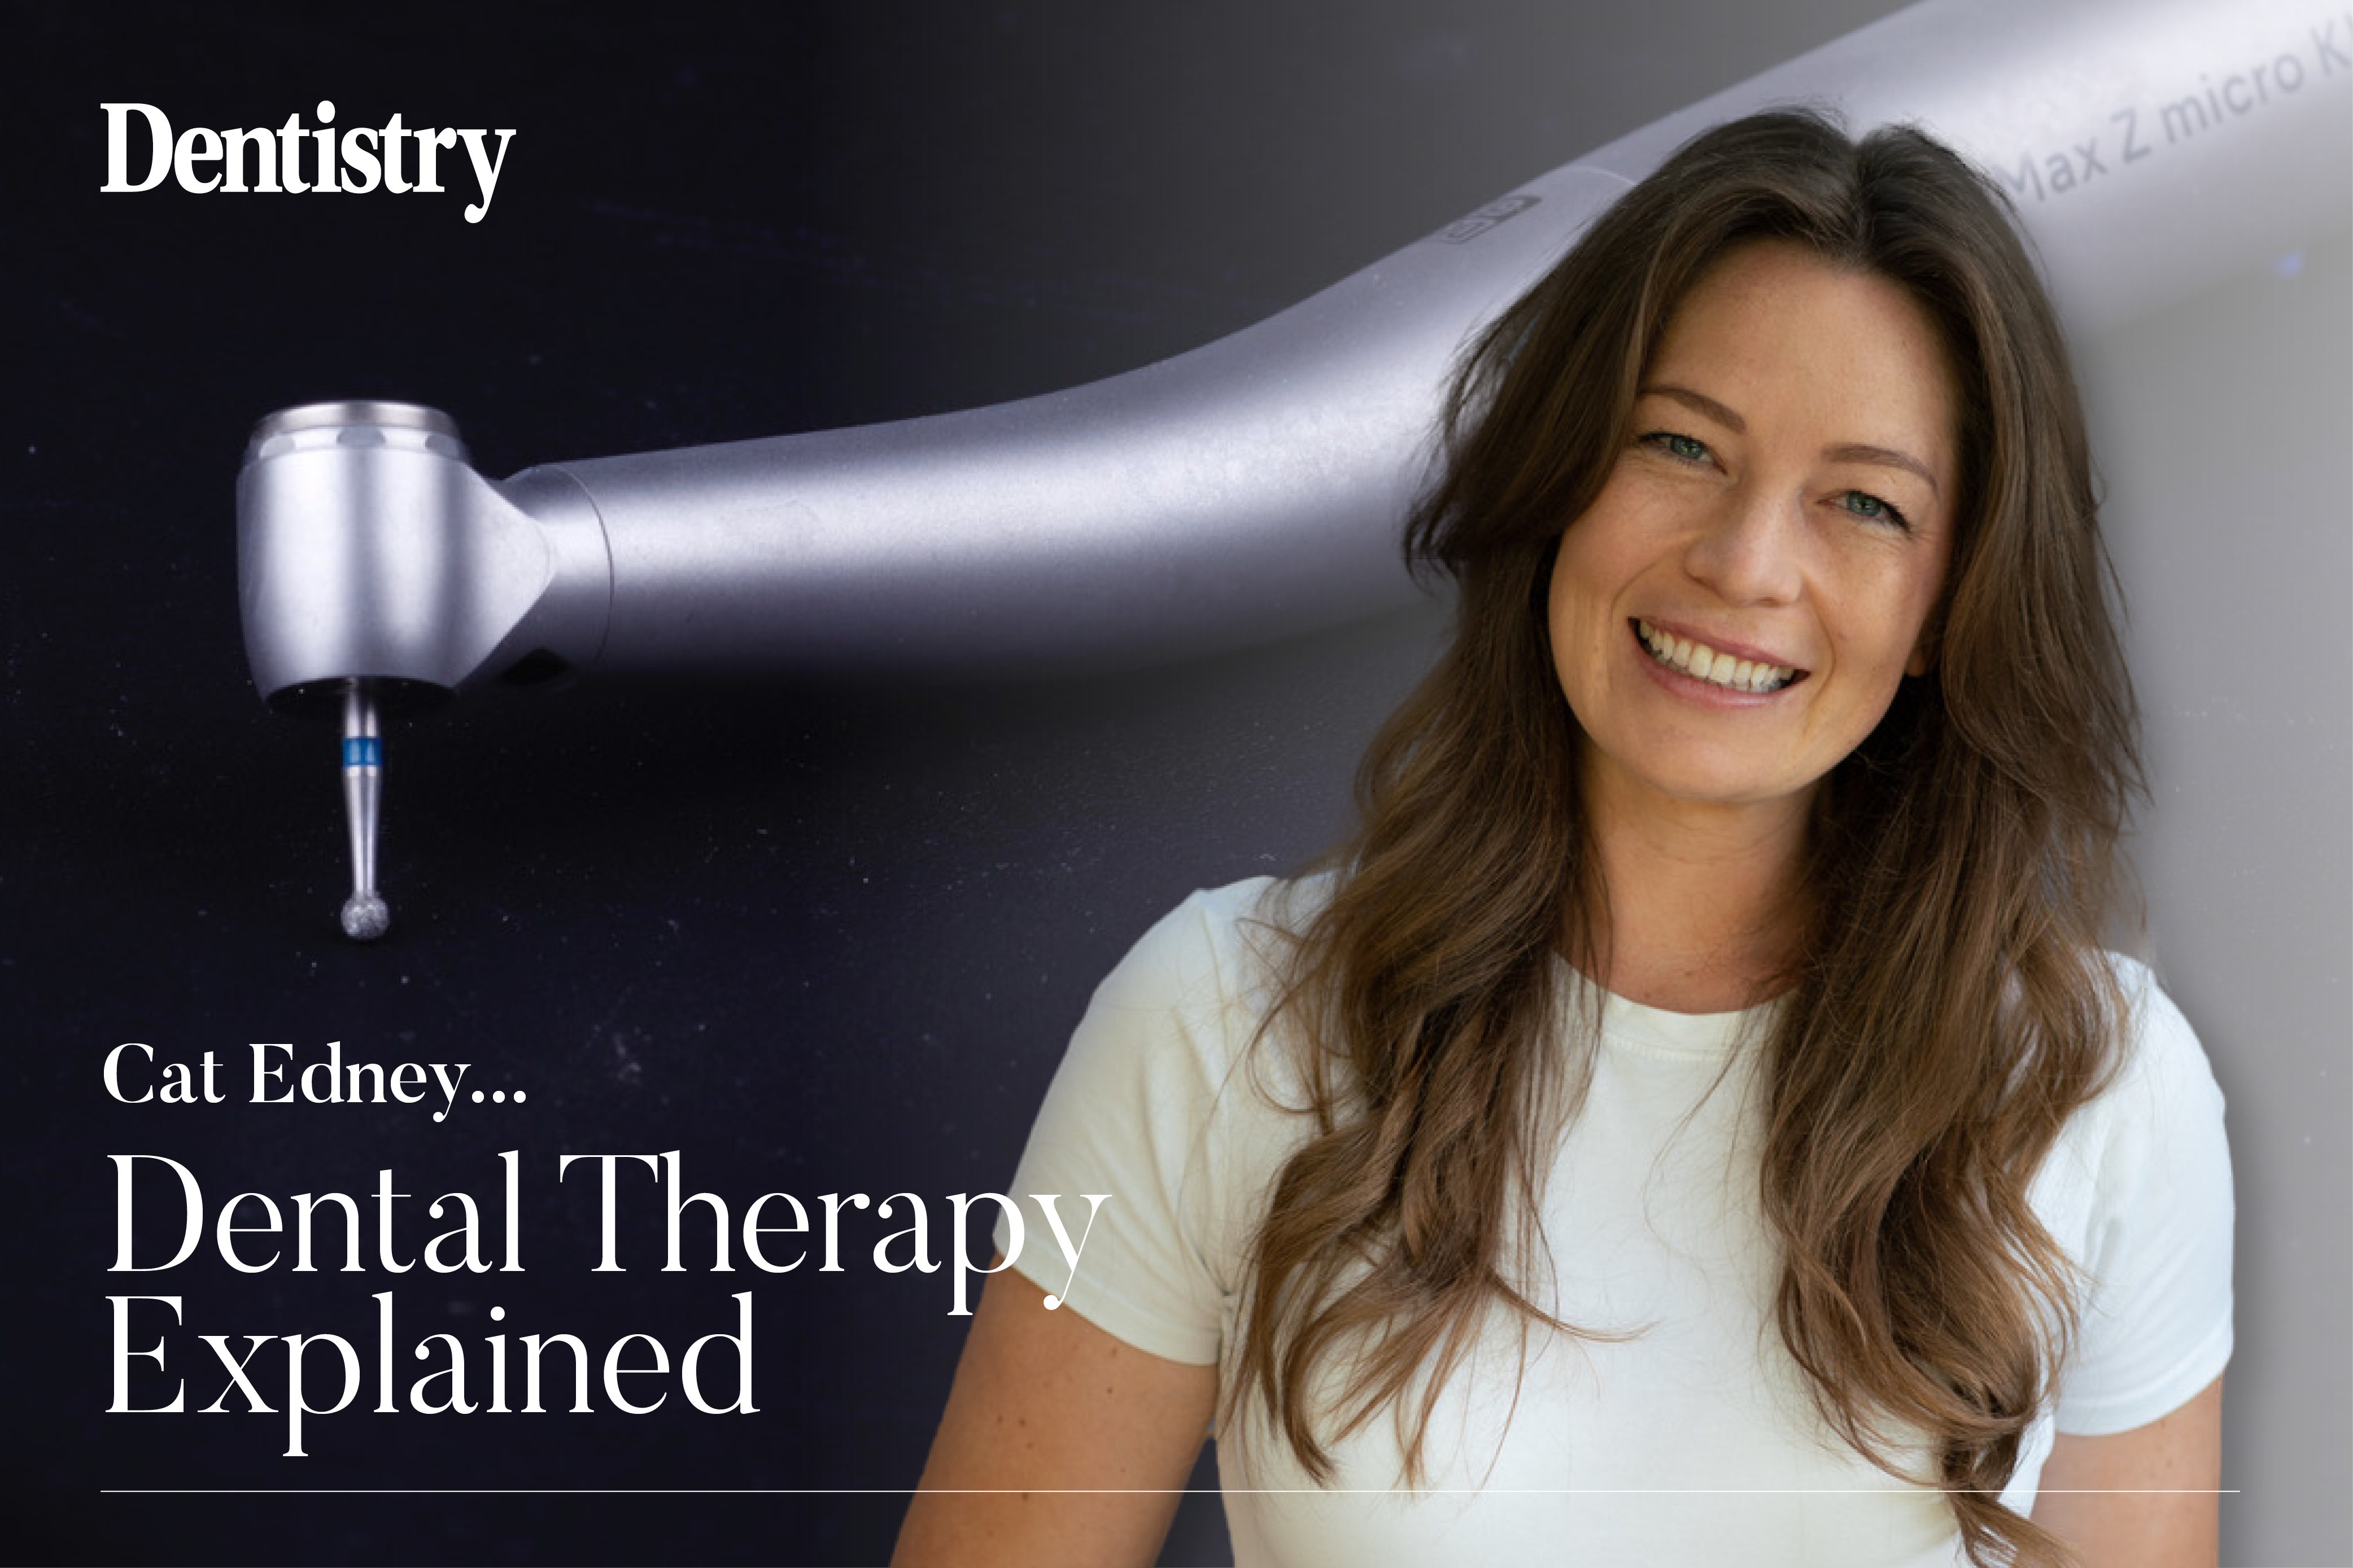 Cat Edney discusses the benefits of a dental therapist